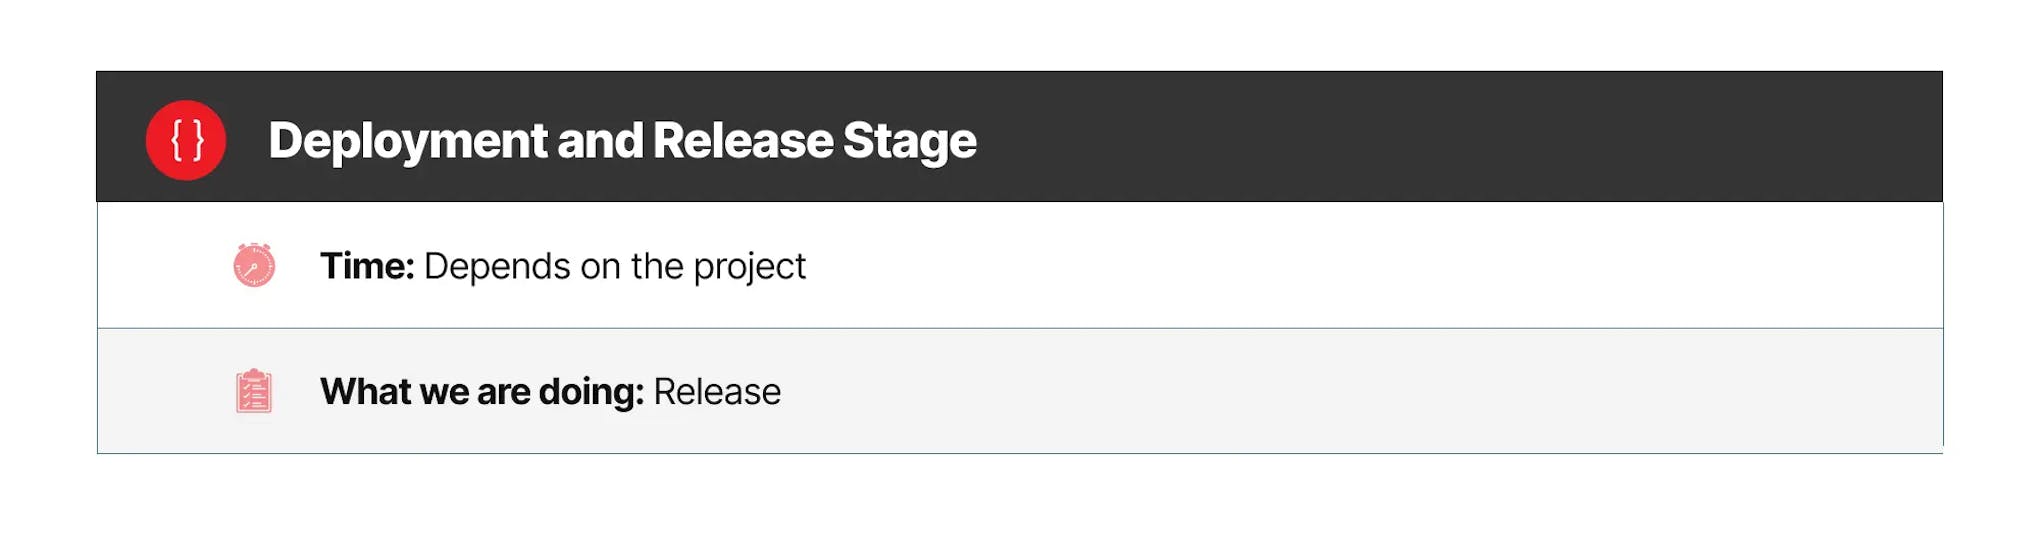 Deployment and release stage